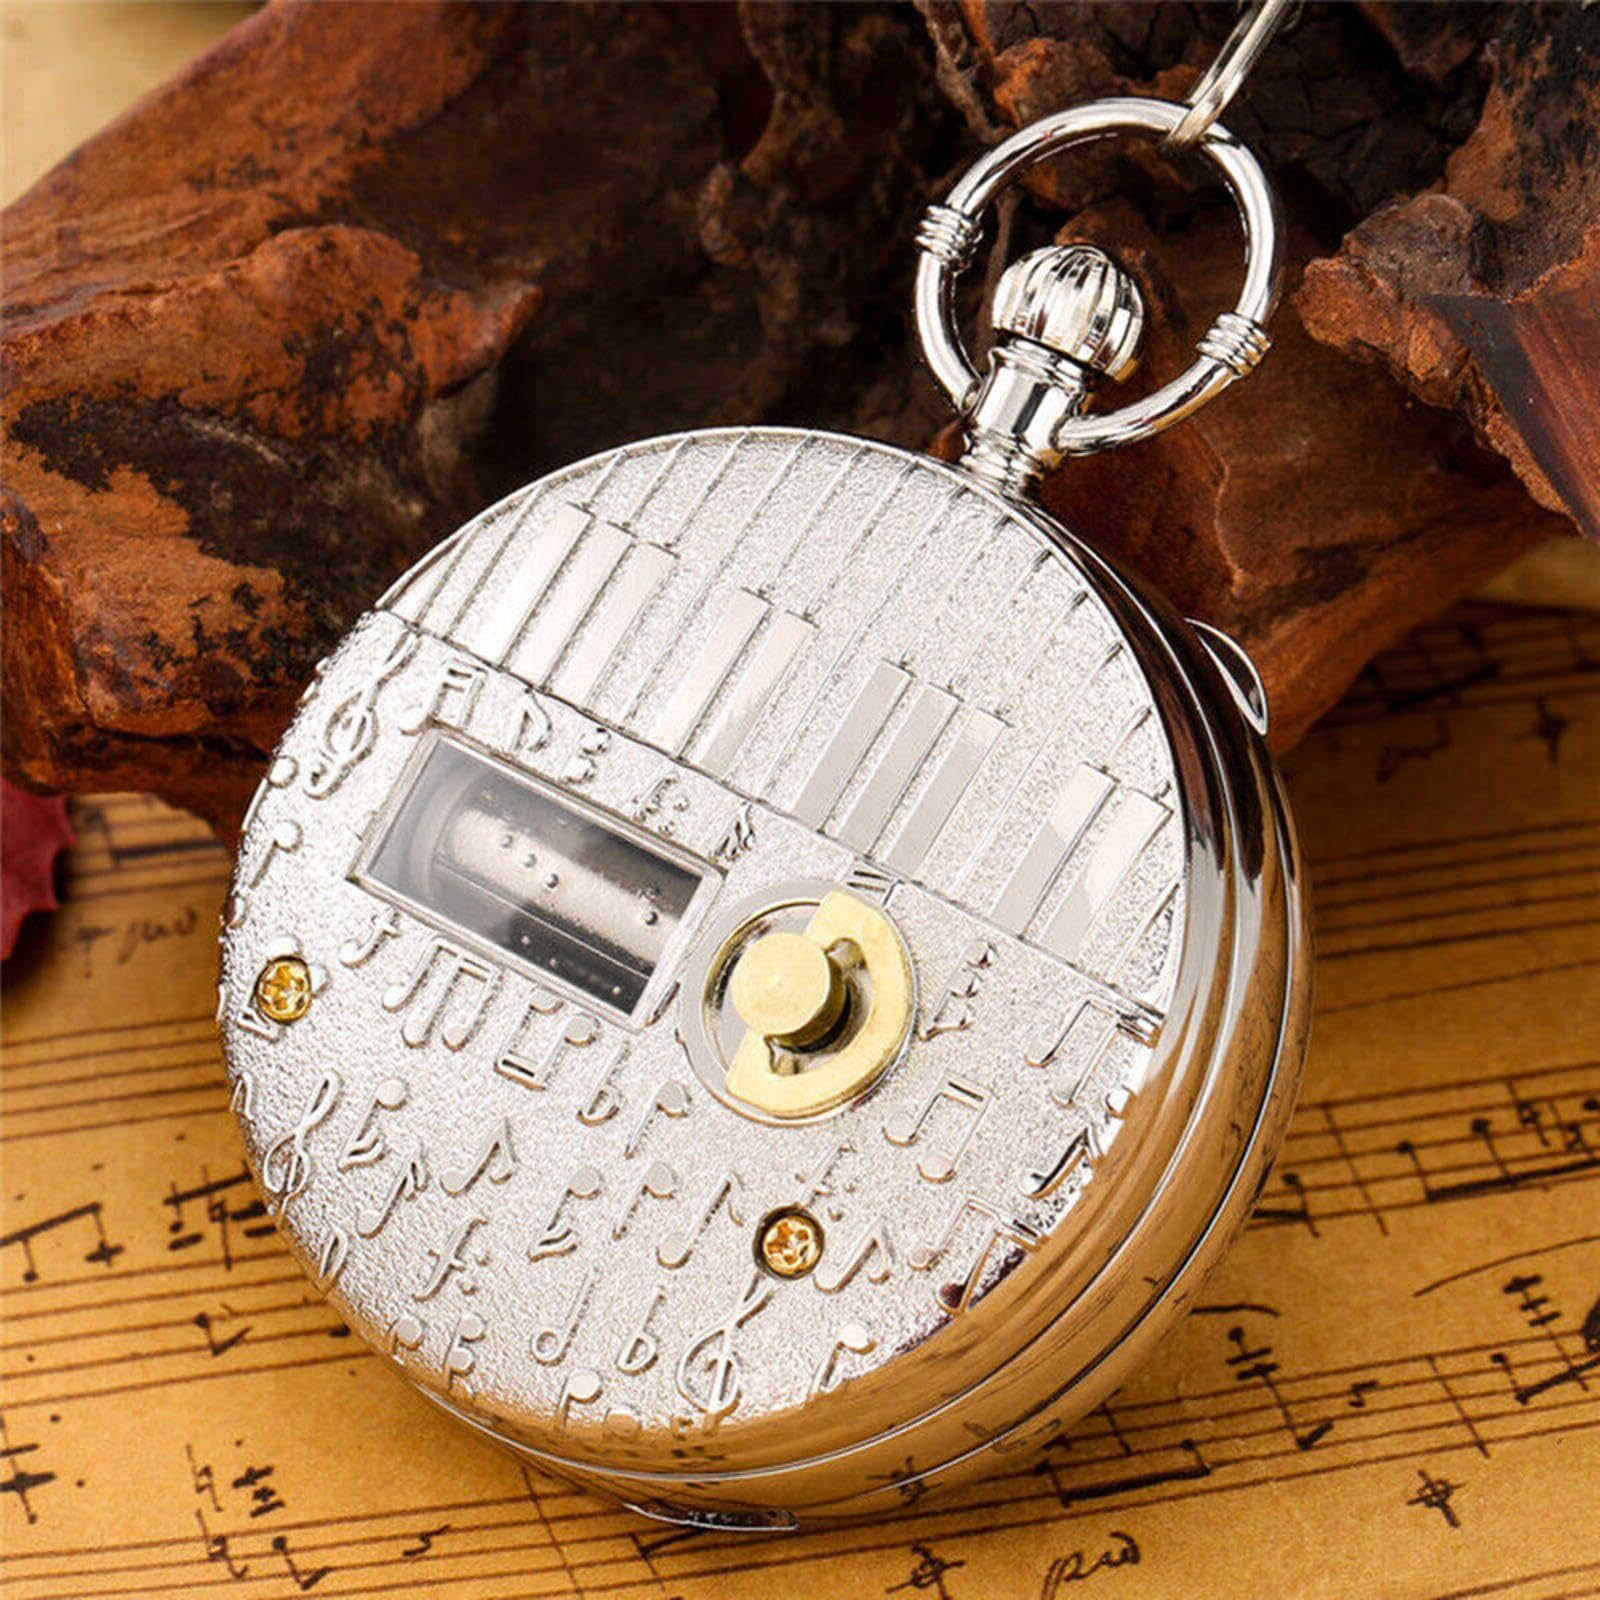 MOUDOAUER Railroad Train Shield Round Case Quartz Pocket Watch, with Music Box Function, Can Play The Music